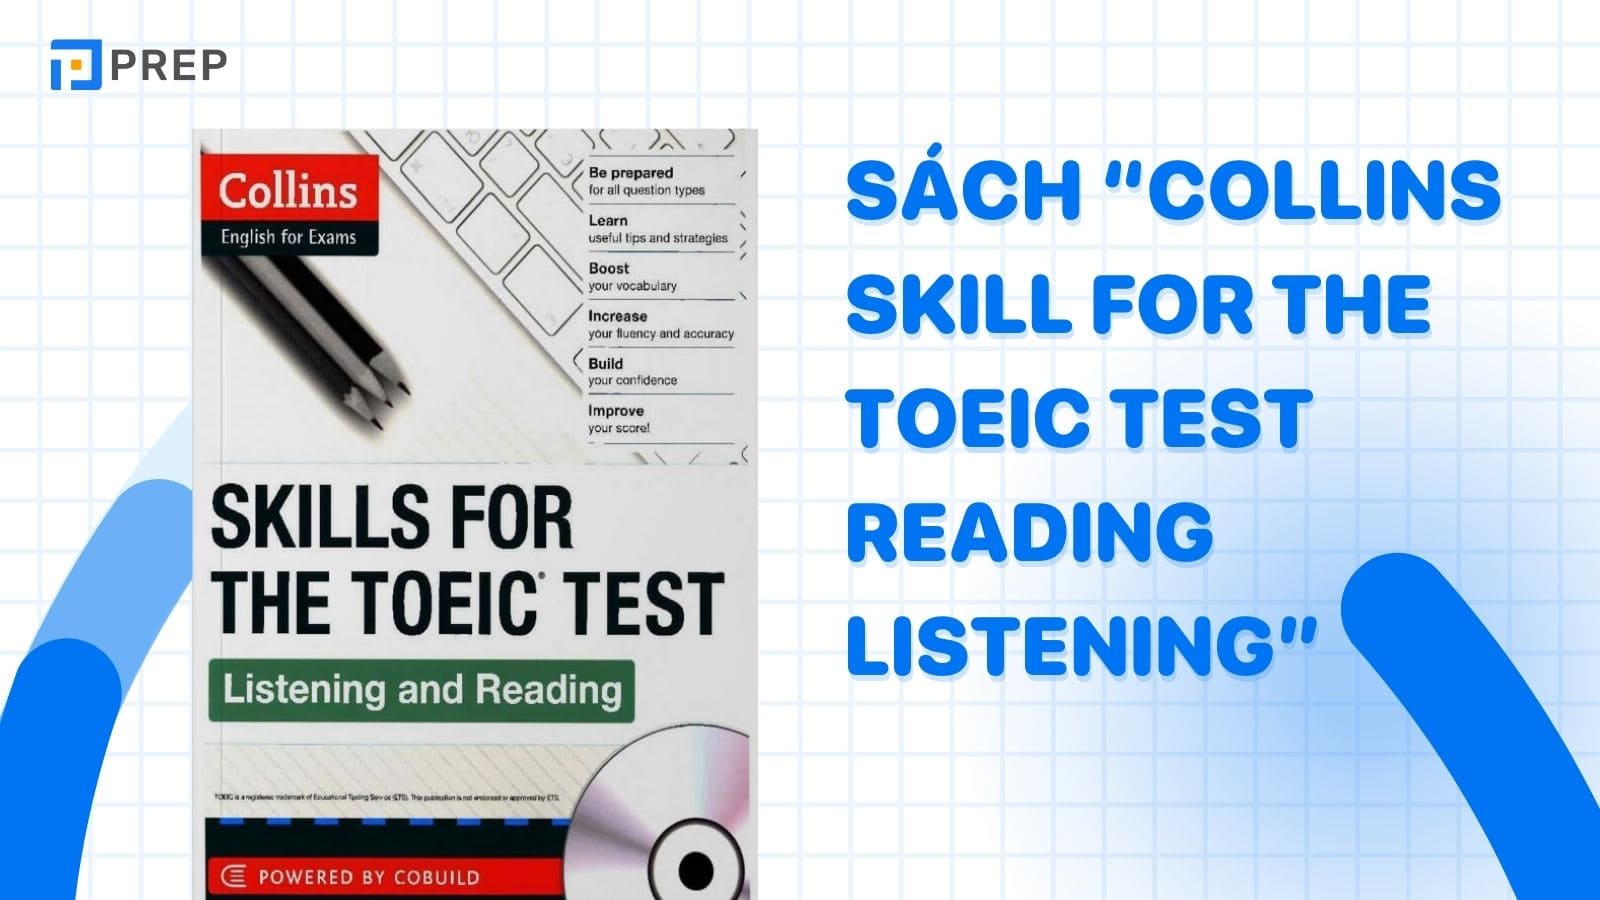 skill-for-the-toeic-test-reading-and-listening.jpg